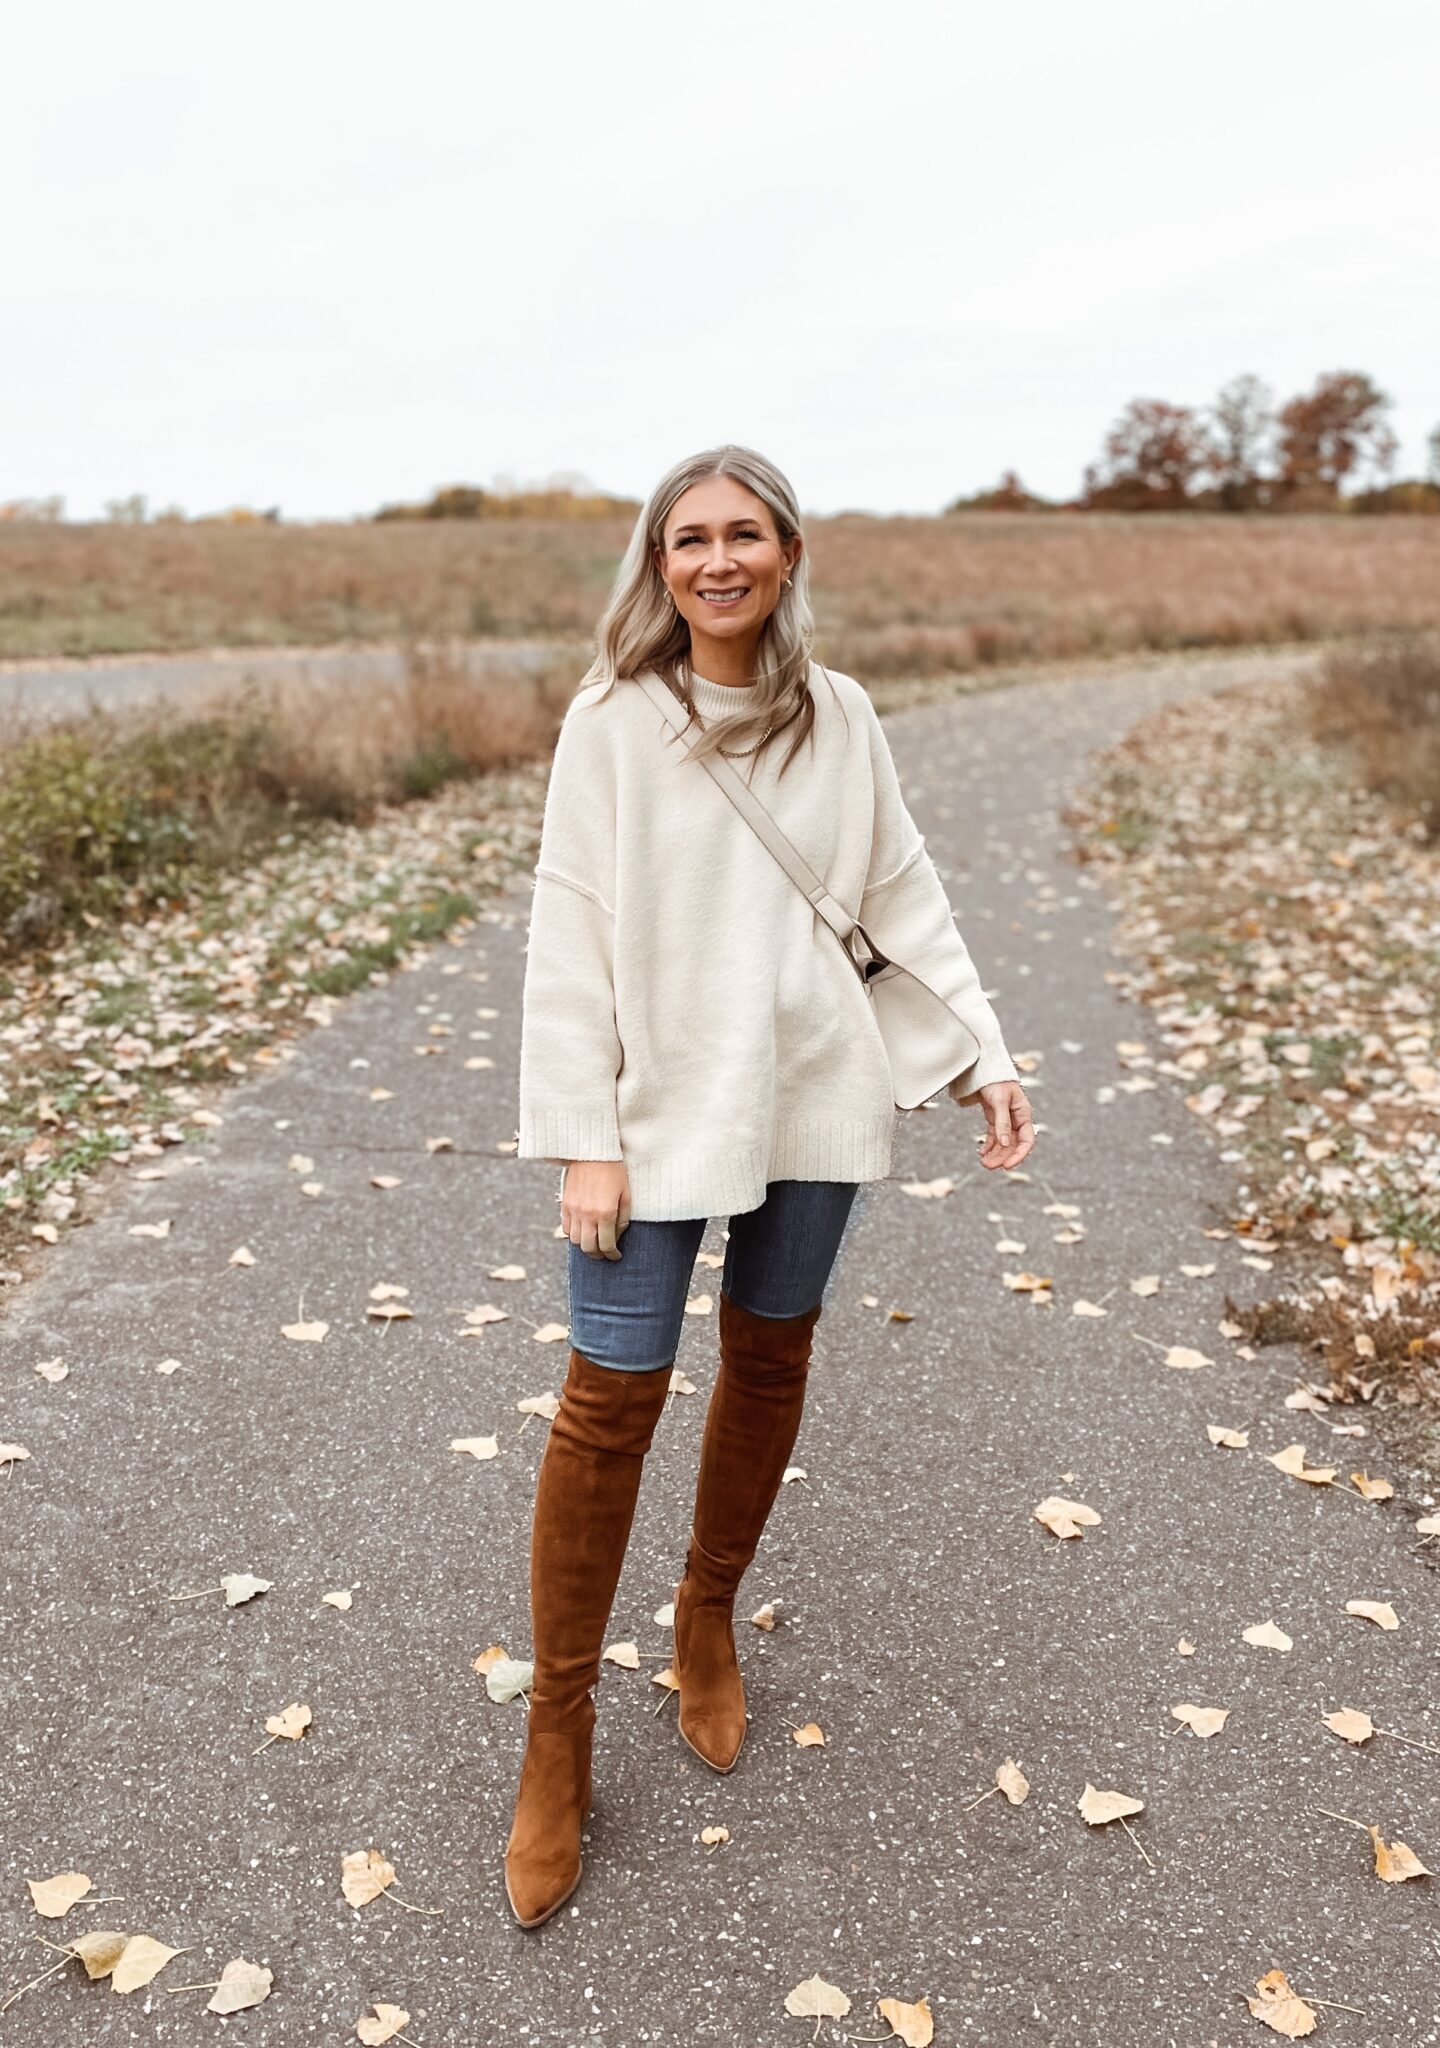 Karin Emily wears the Peaches sweater from Free People, dark wash skinny jeans, and brown over the knee boots